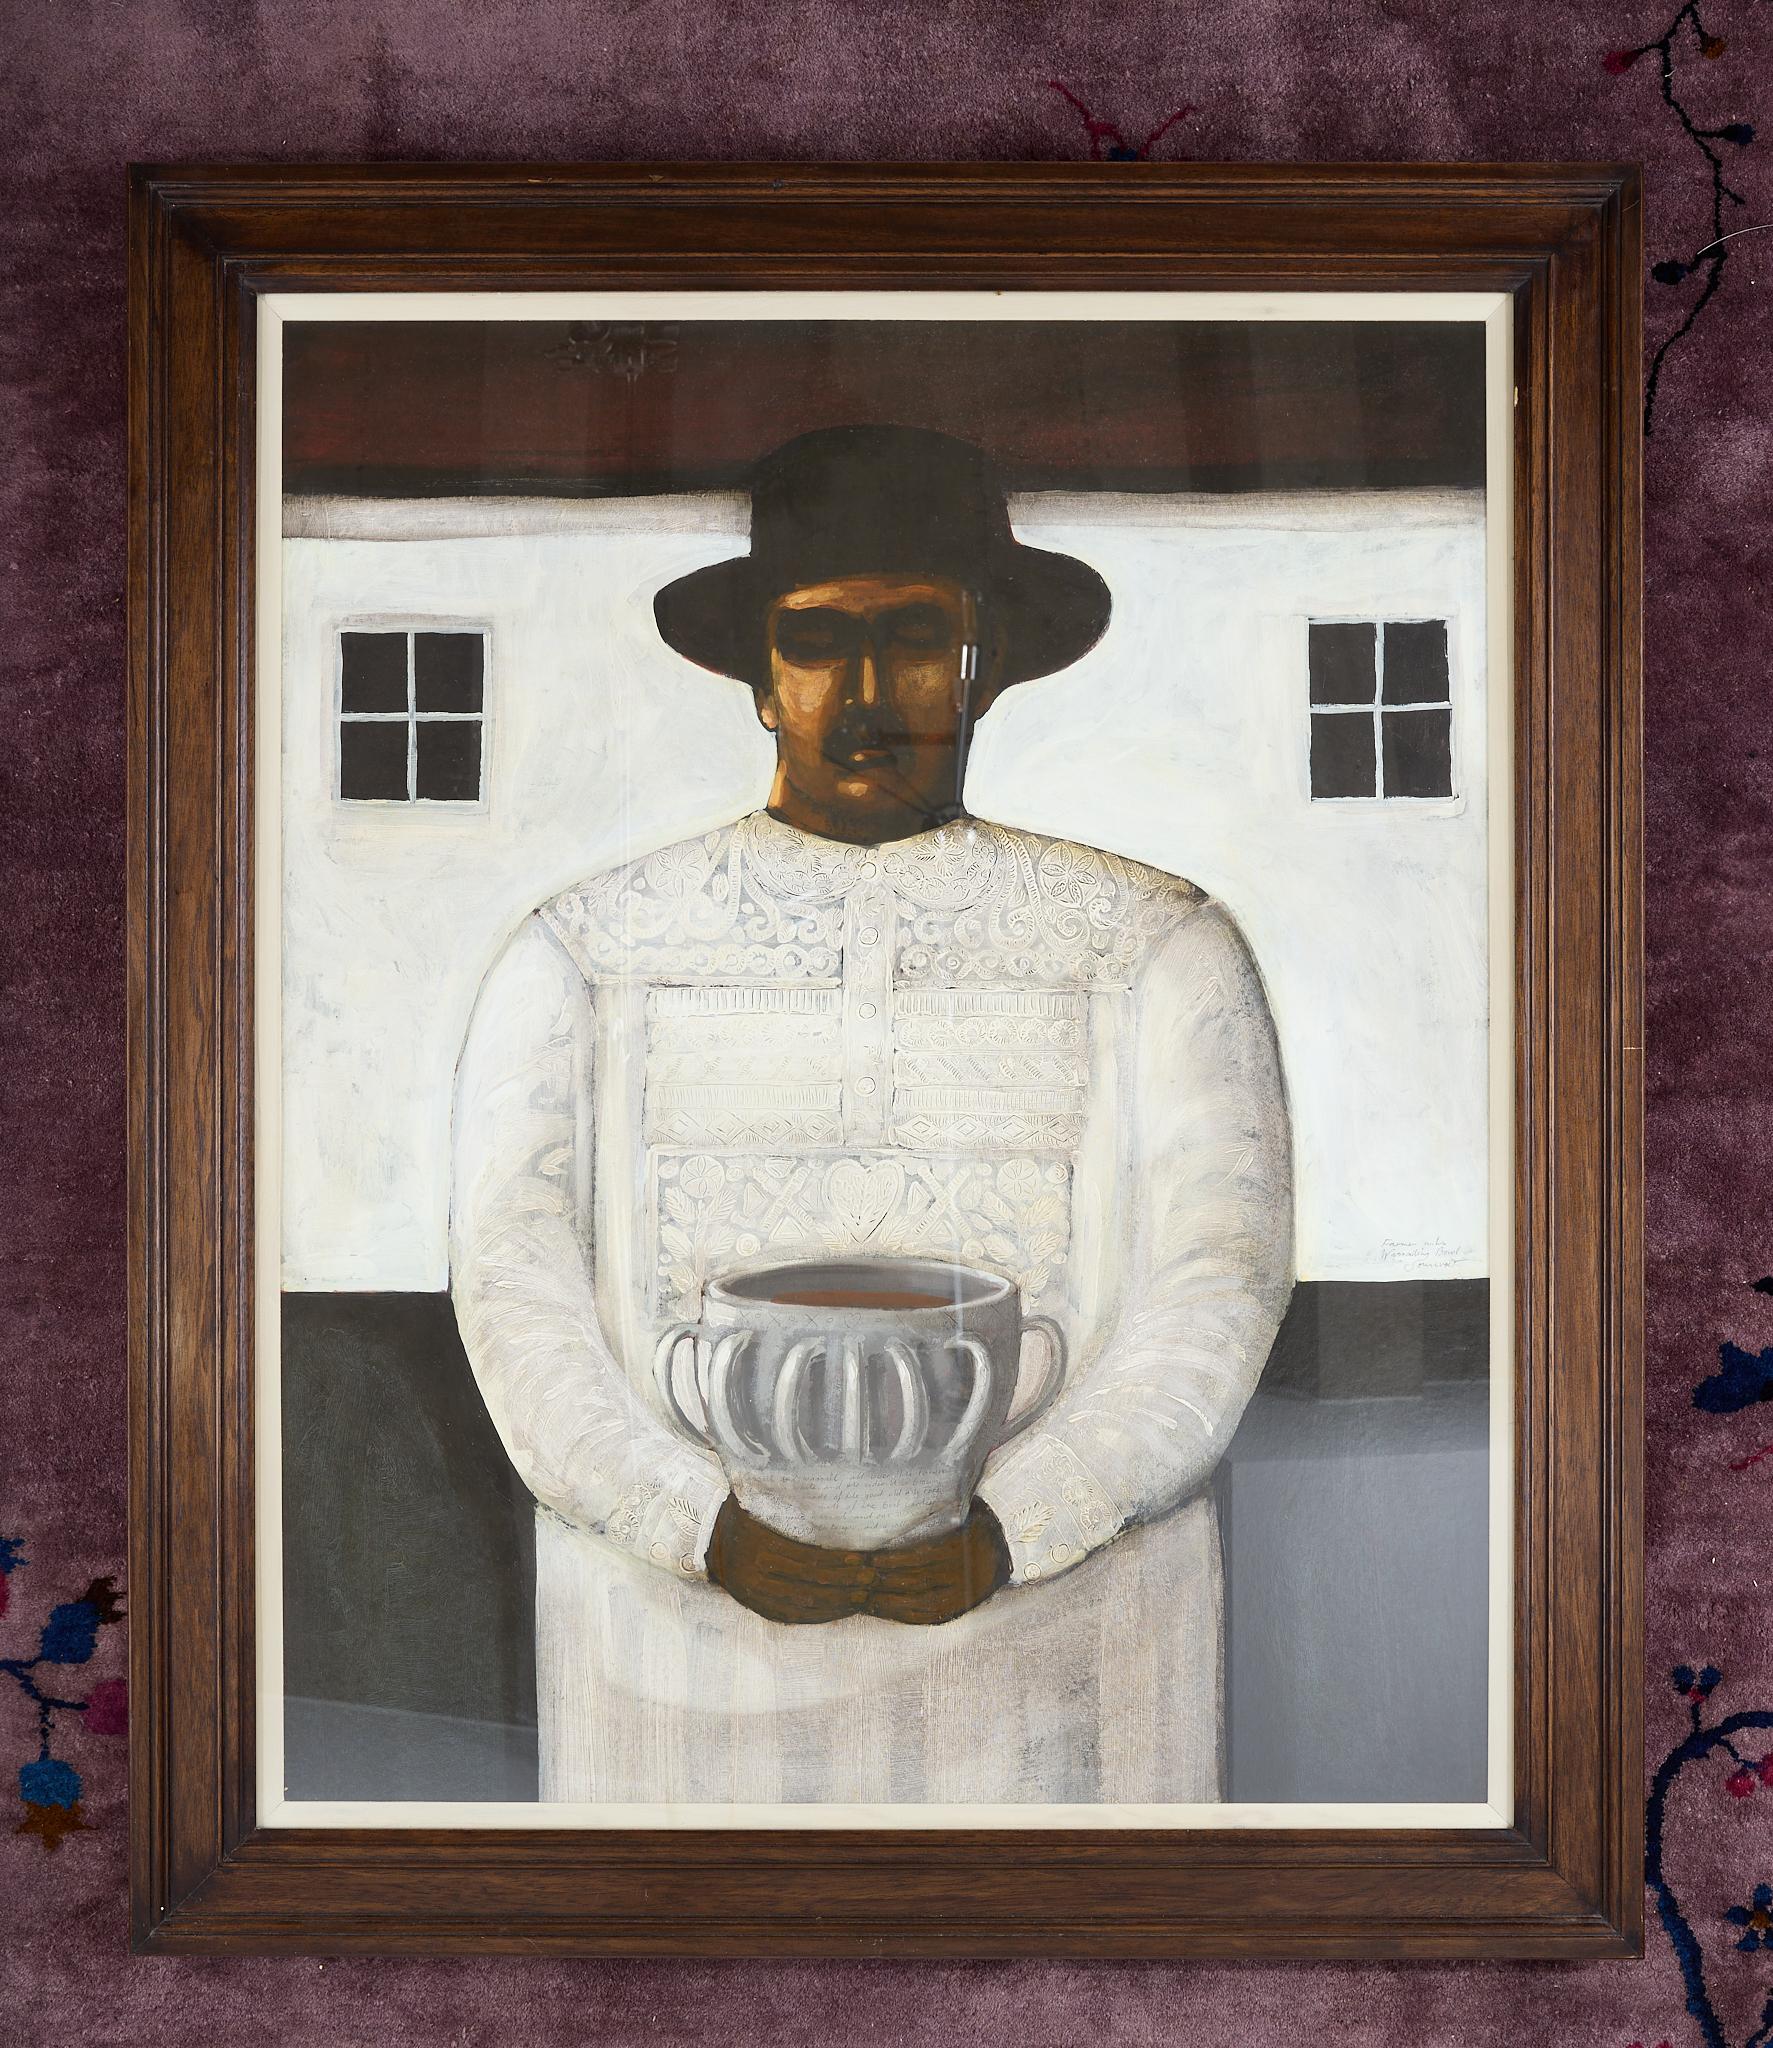 Farmer with Wassailing Bowl, Somerset, by John Caple, British, Born 1966
Mixed media, signed and titled. Framed in a substantial oak frame.
This is a powerful and moving piece by  renowned contemporary British painter John Caple, depicting a peasant